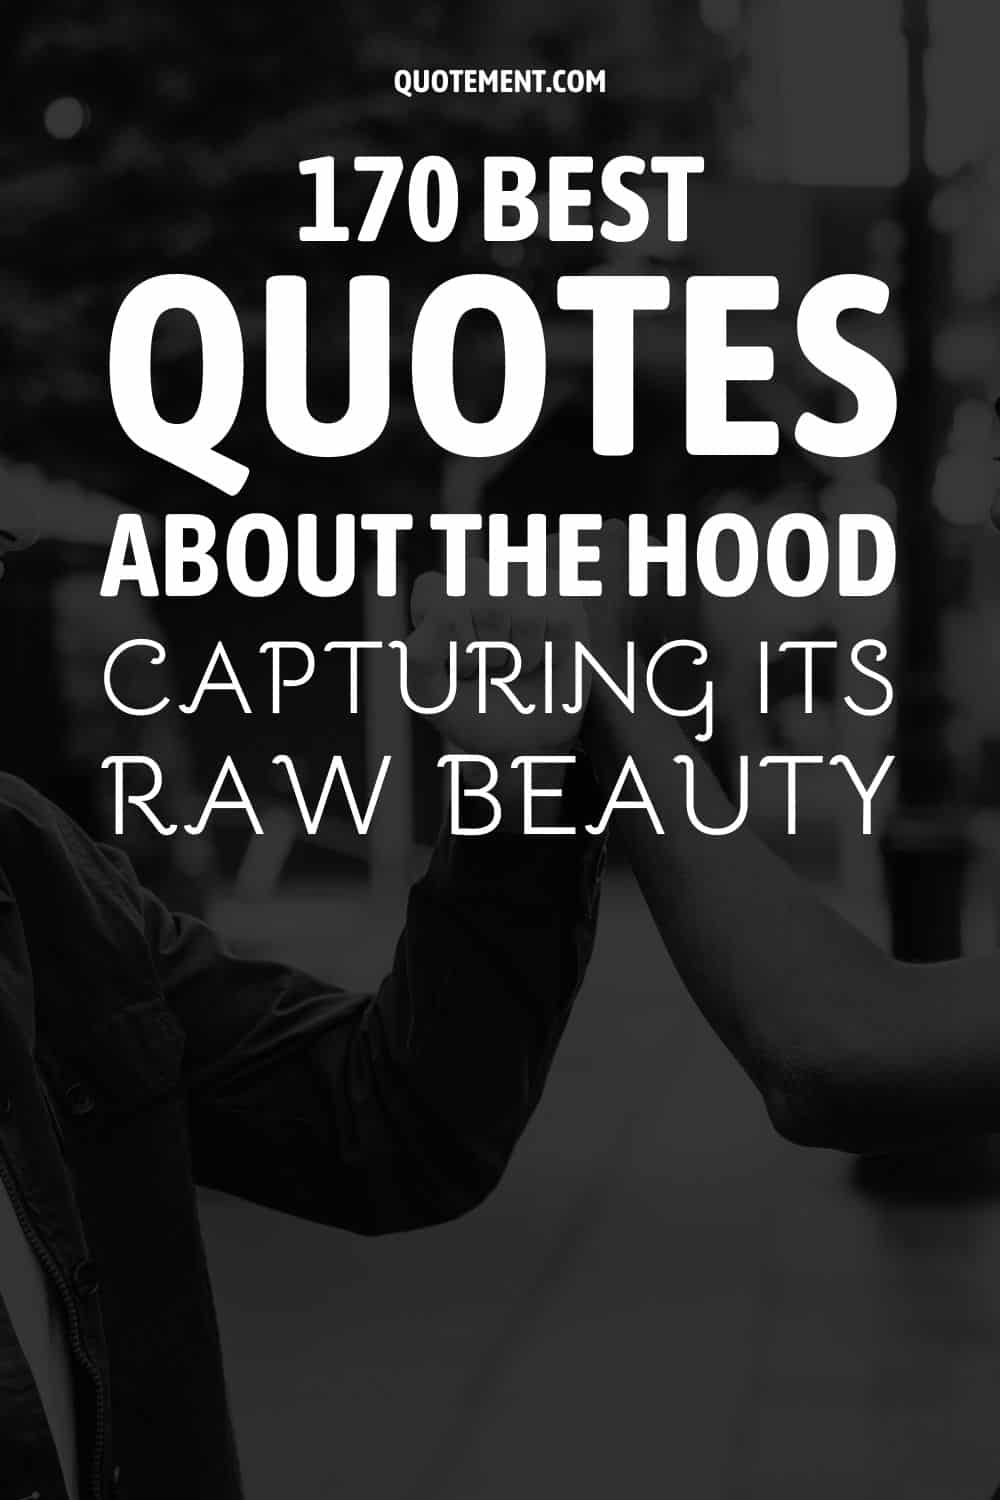 170 Best Quotes About The Hood Capturing Its Raw Beauty